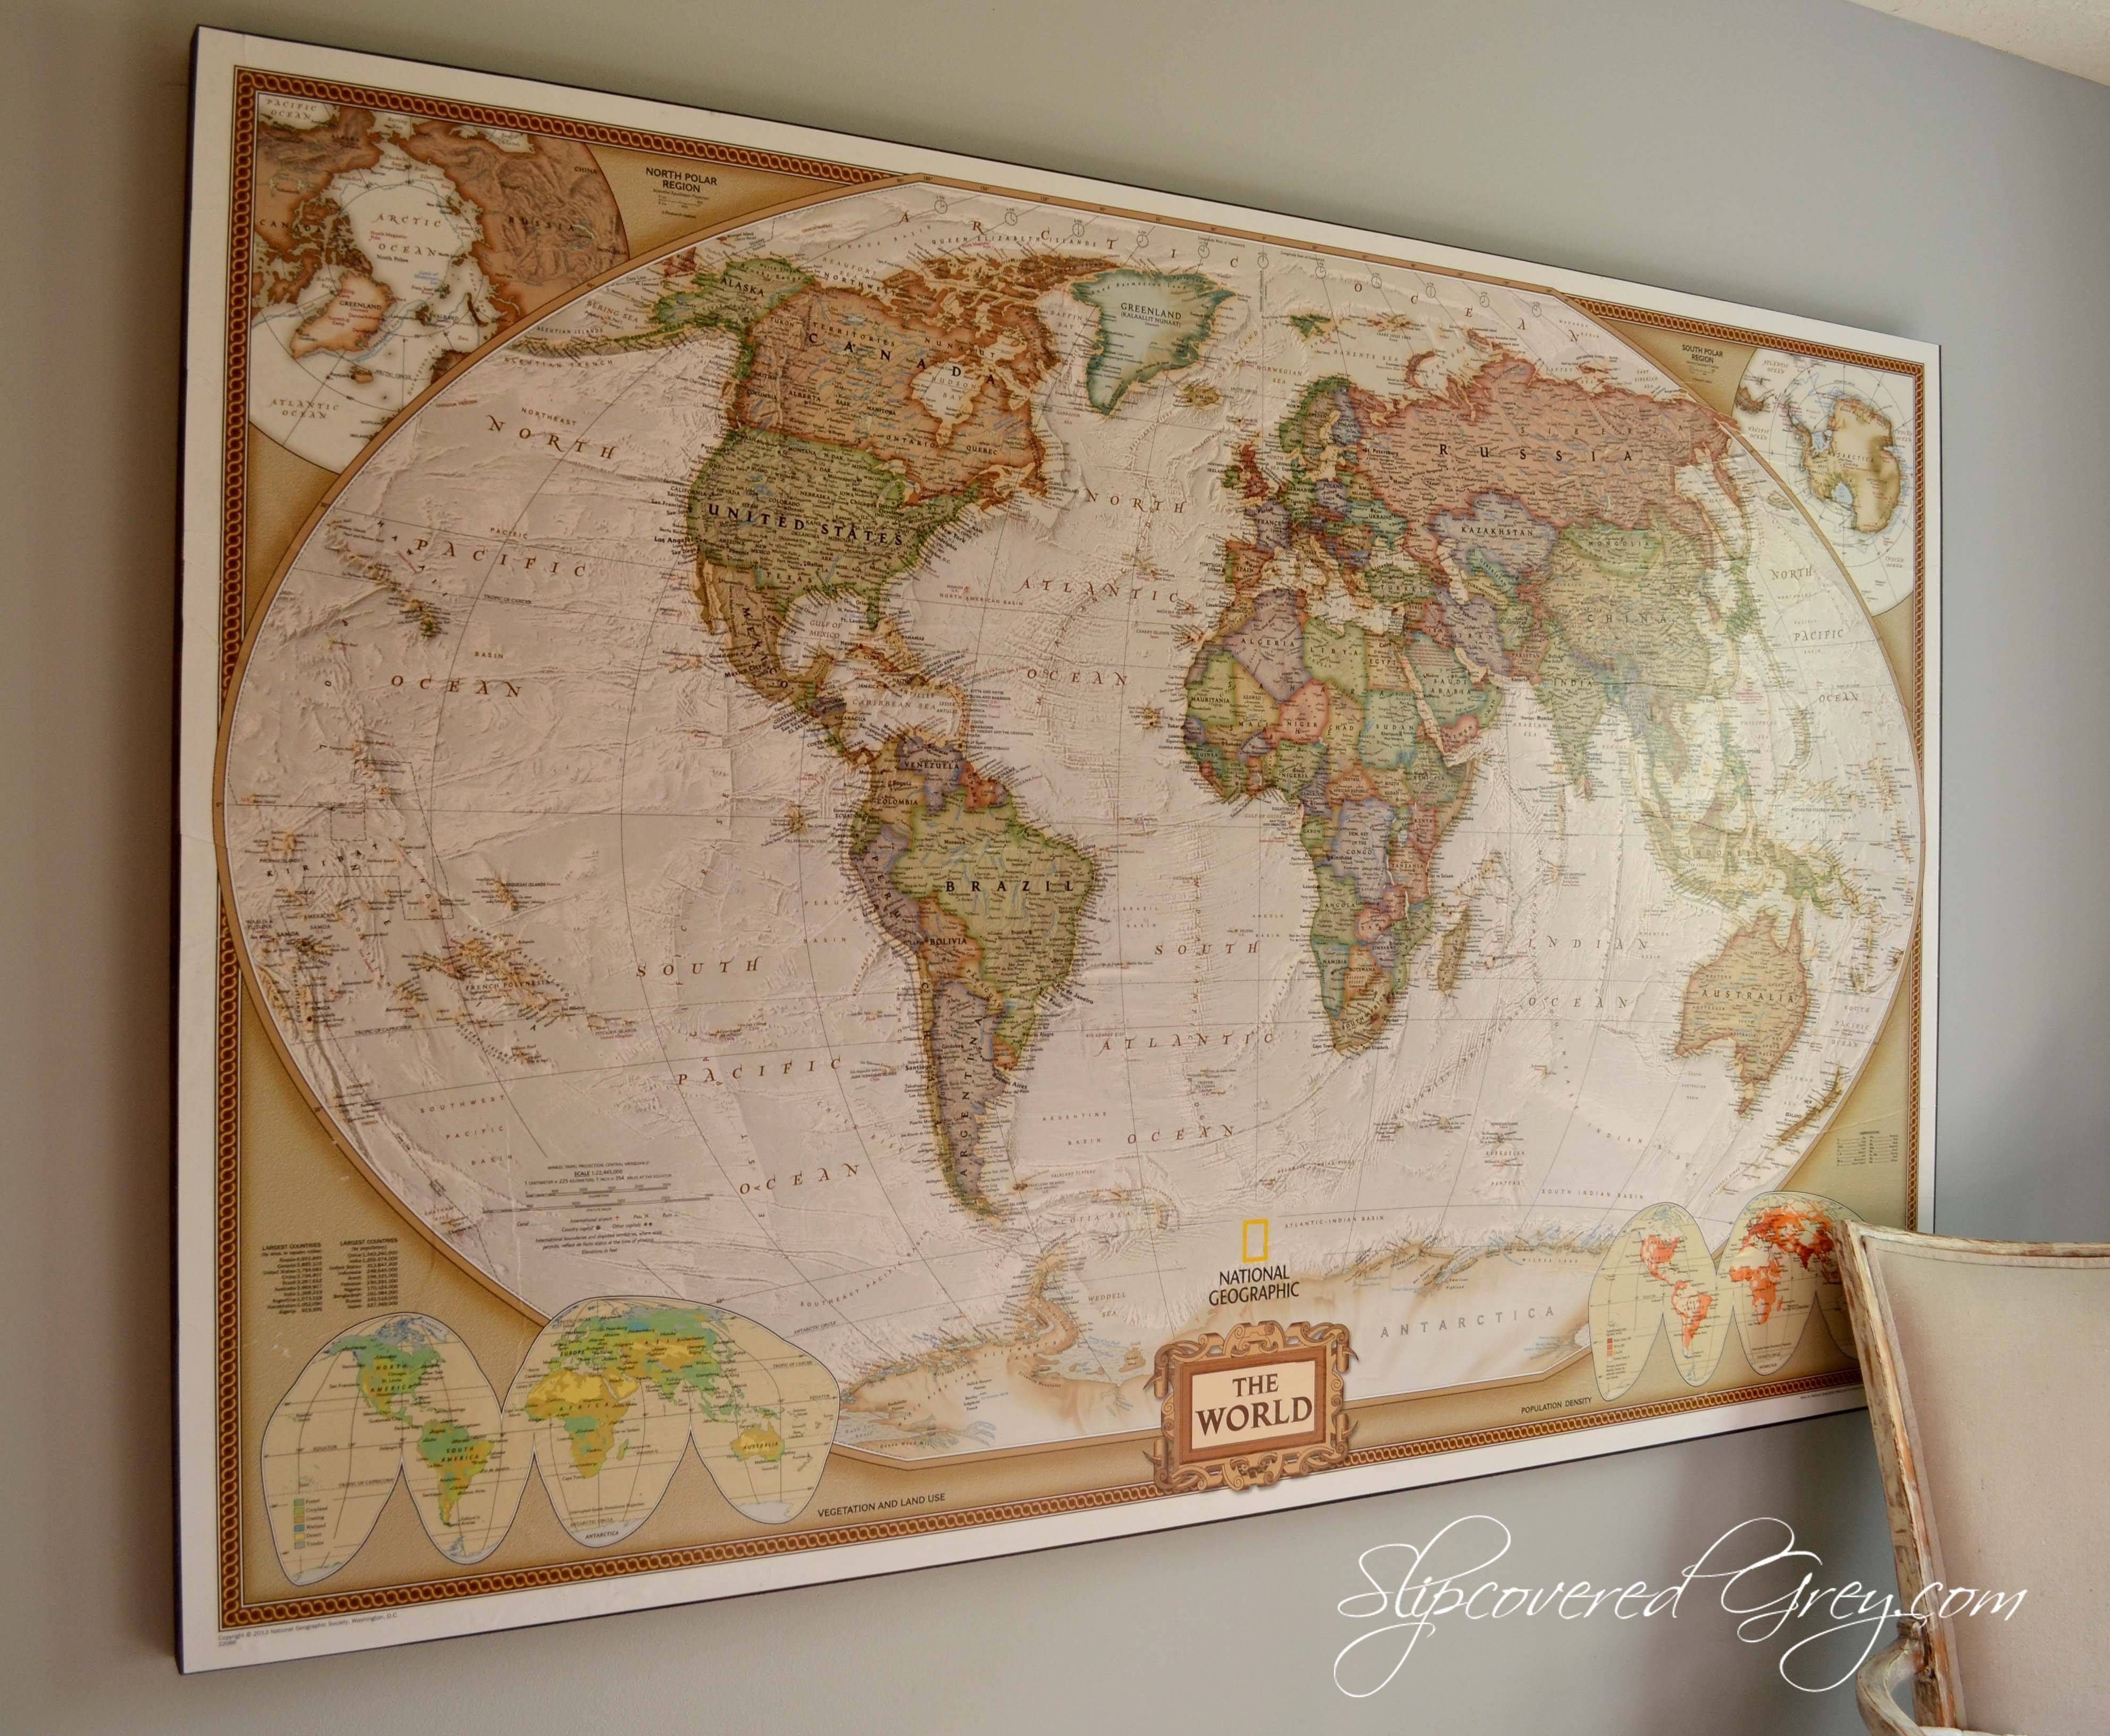 Wall Art Designs: World Framed Wall Art Maps Canvas United States For Most Up To Date United States Map Wall Art (View 17 of 20)